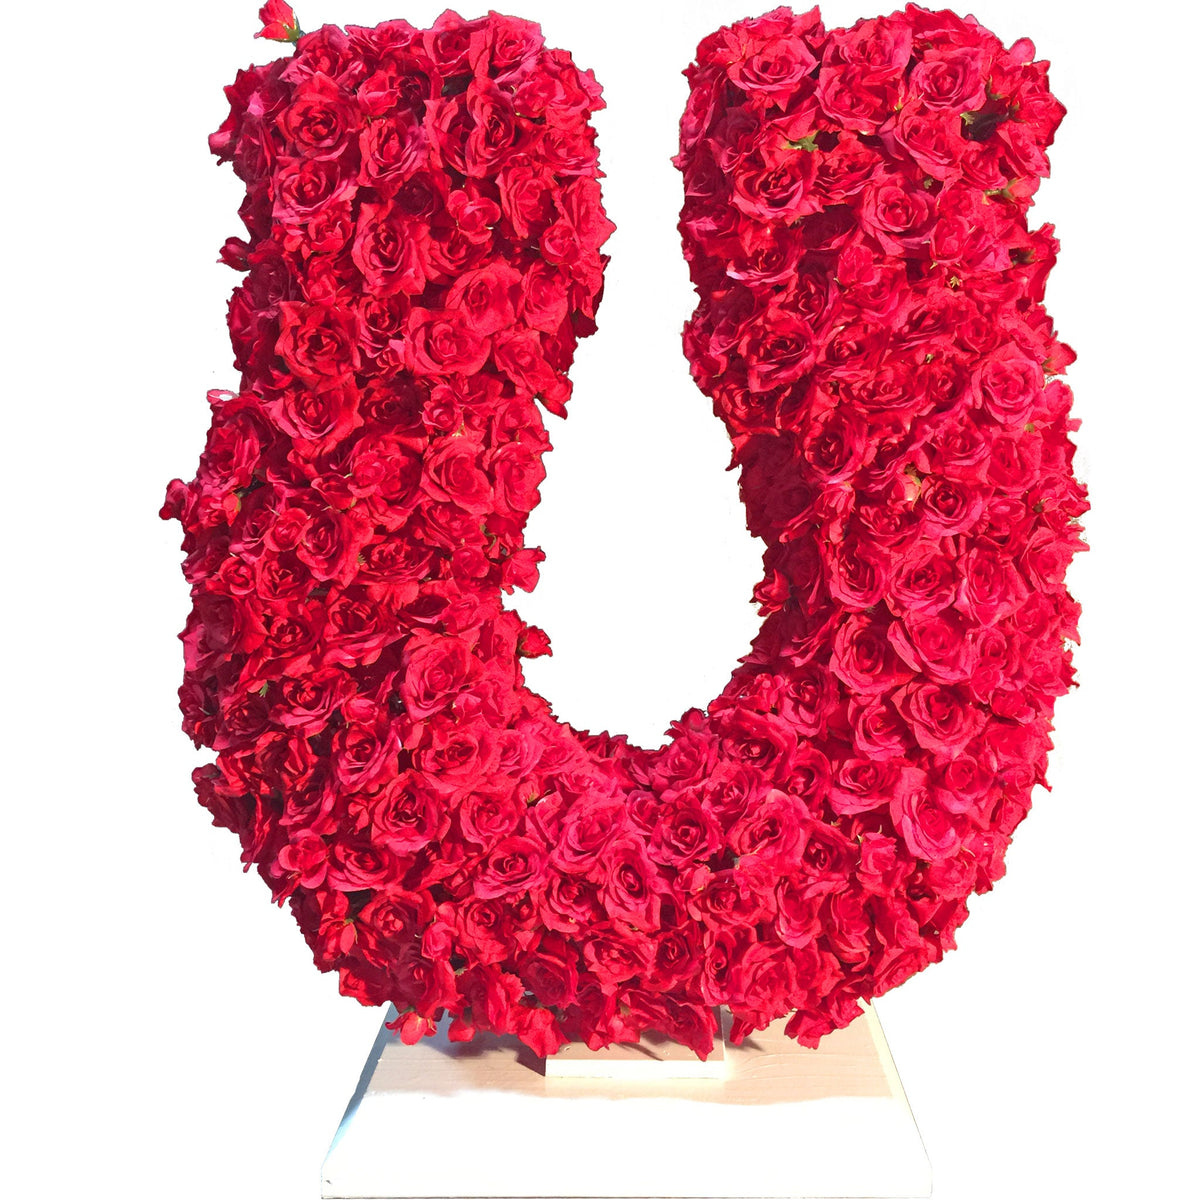 30in tall Rose Petal Horseshoe Centerpiece and Tabletop Display made with artificial rosebud flowers on a foam core and a wooden base painted in red.